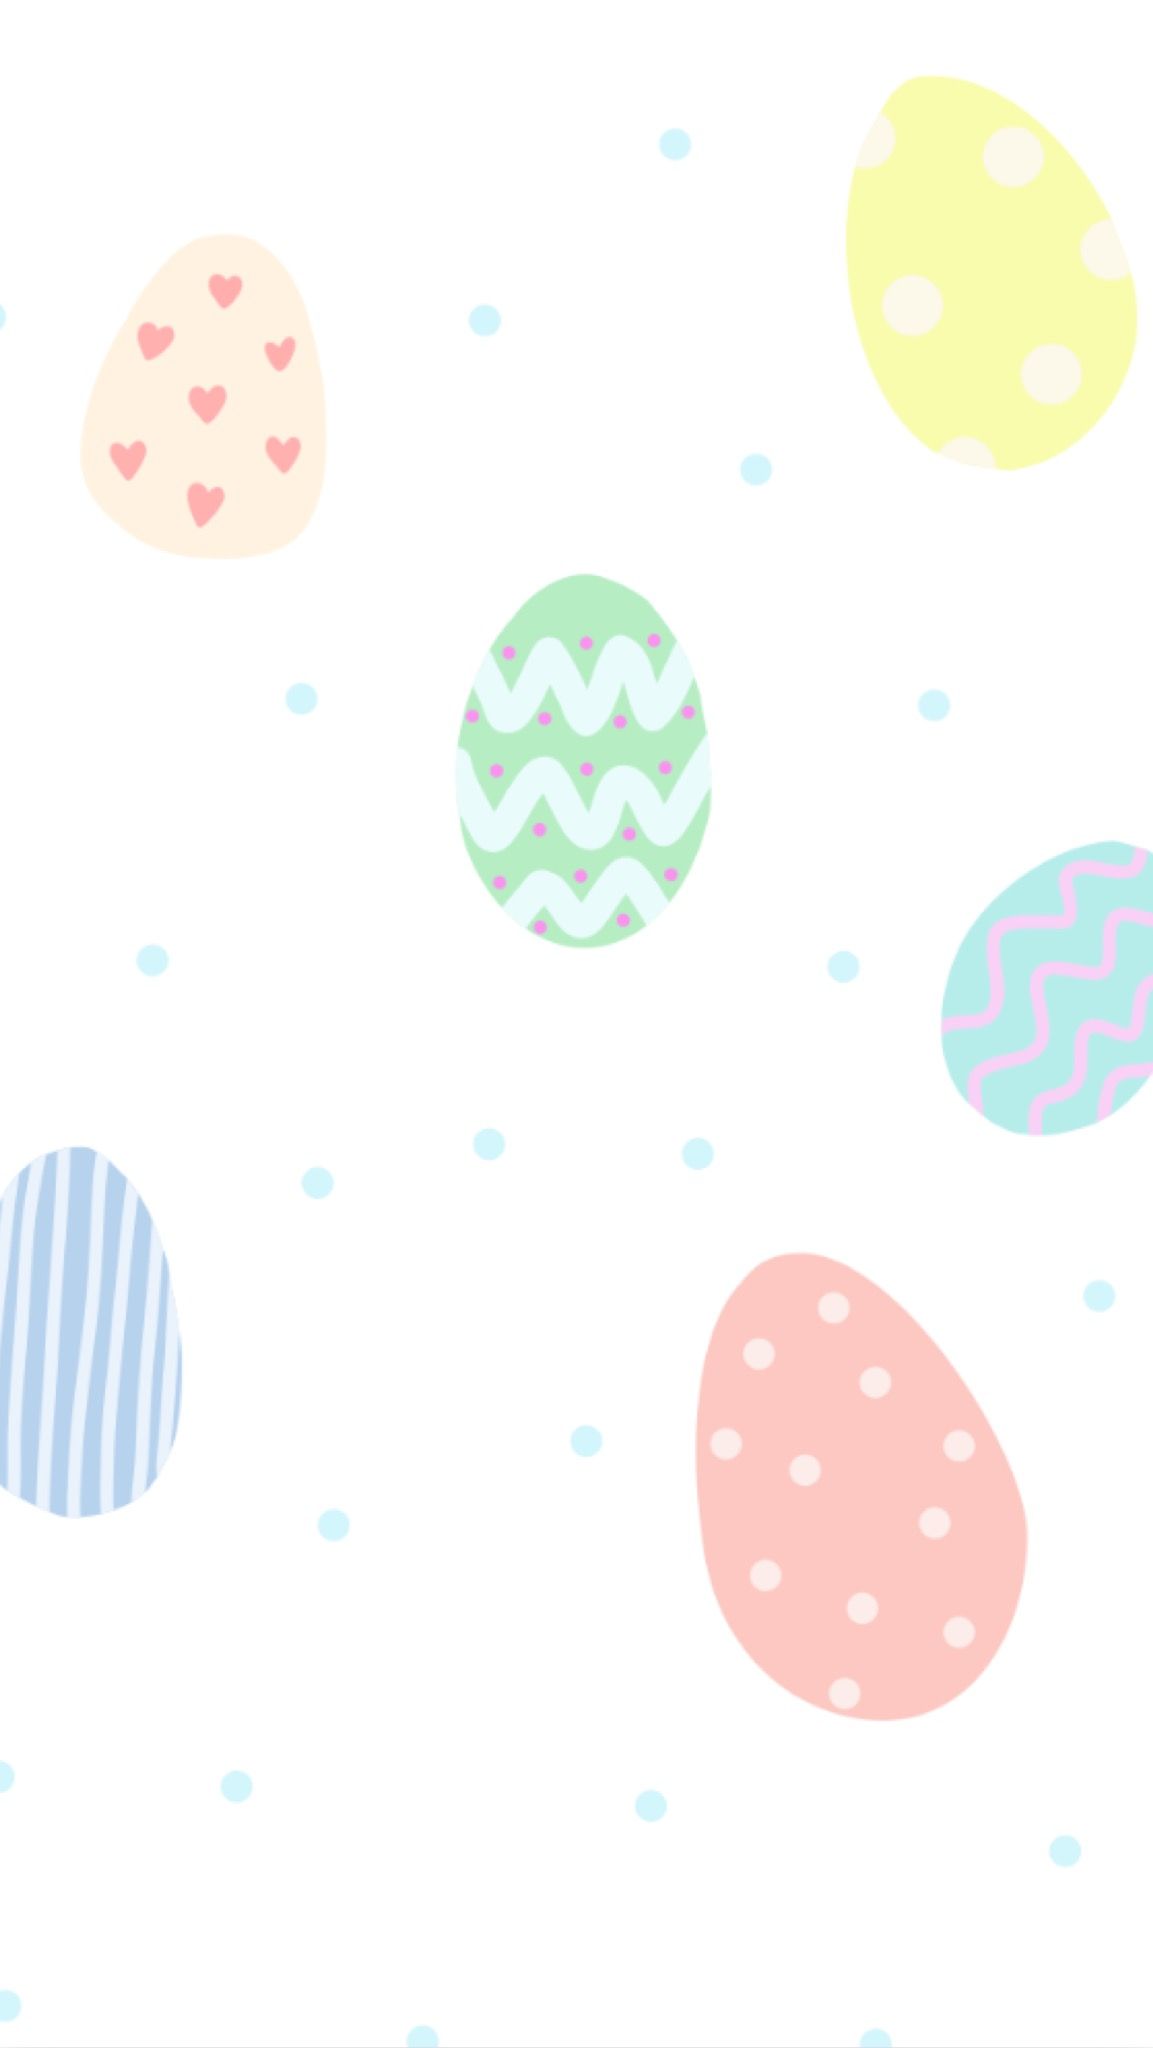 A pattern of colorful eggs on white background - Easter, egg